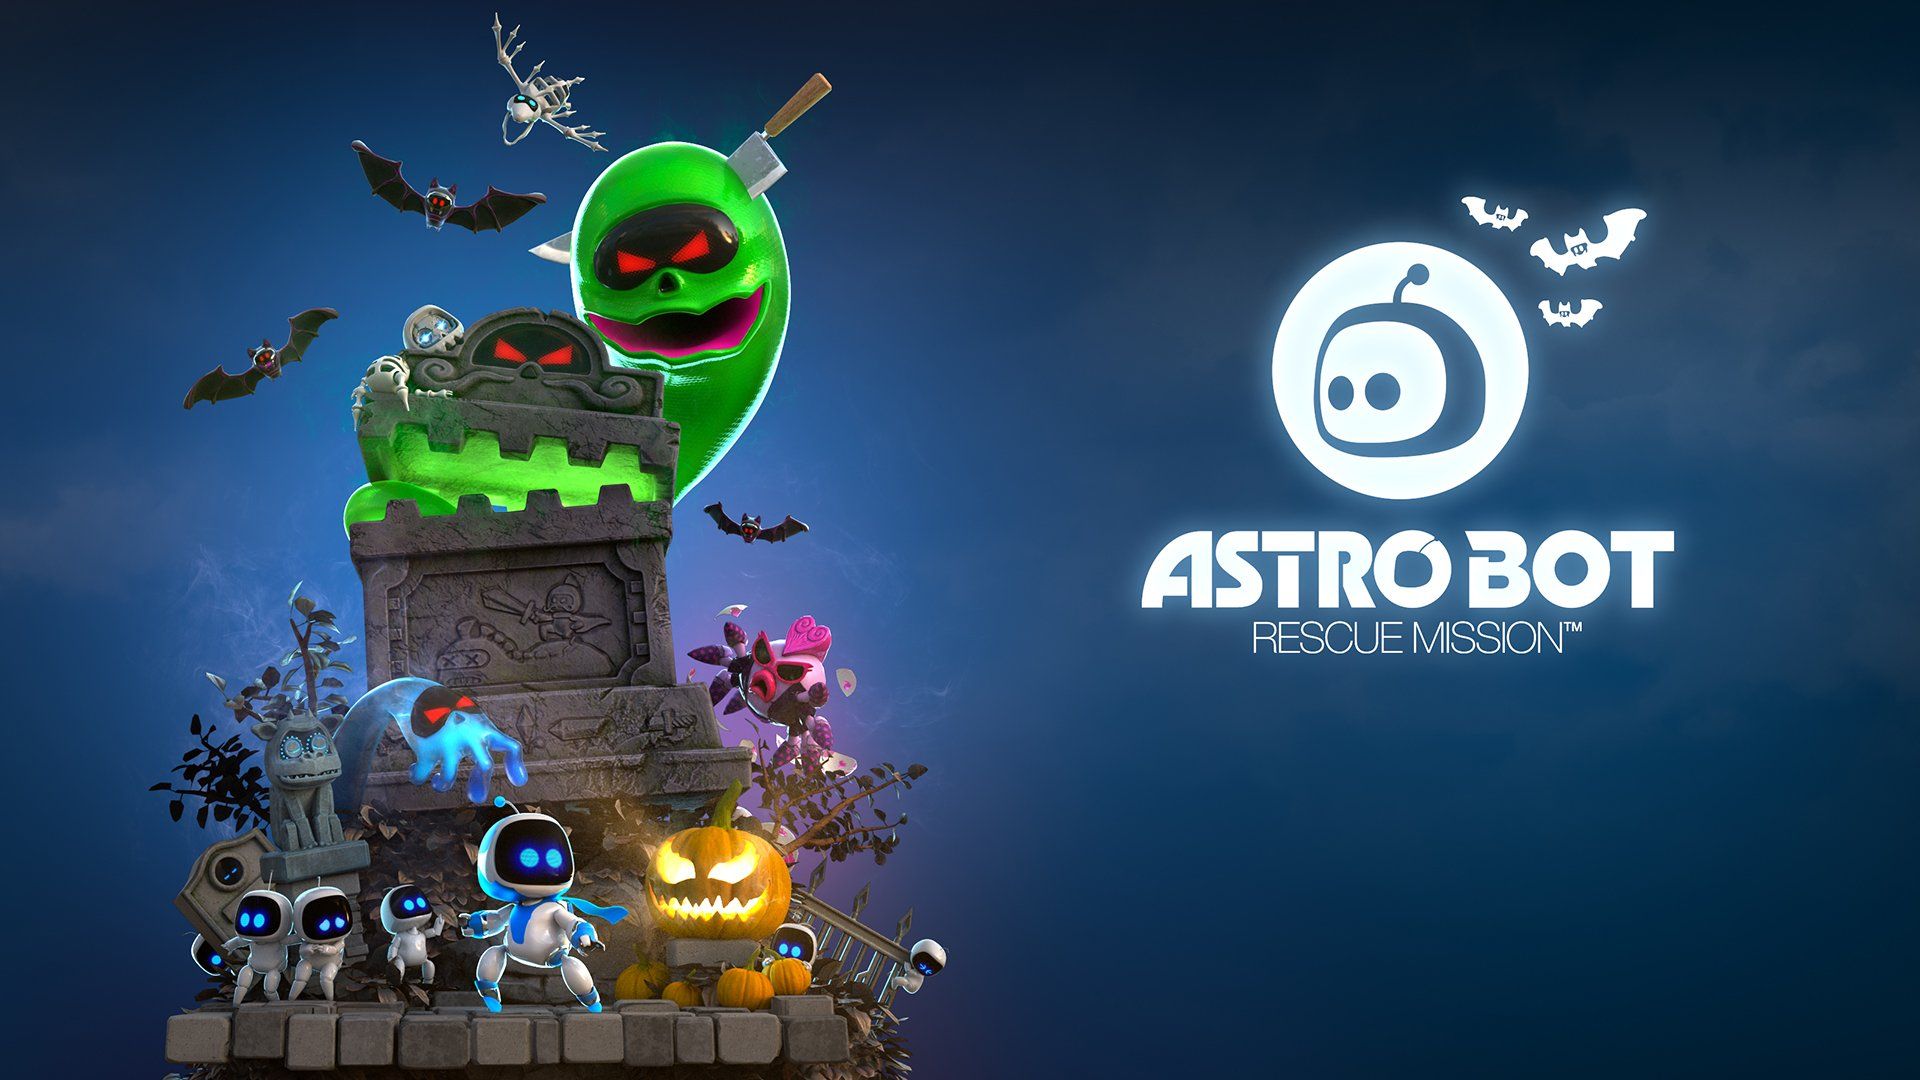 PlayStation team behind ASTRO BOT Rescue Mission wishes you a spooktacular Halloween!